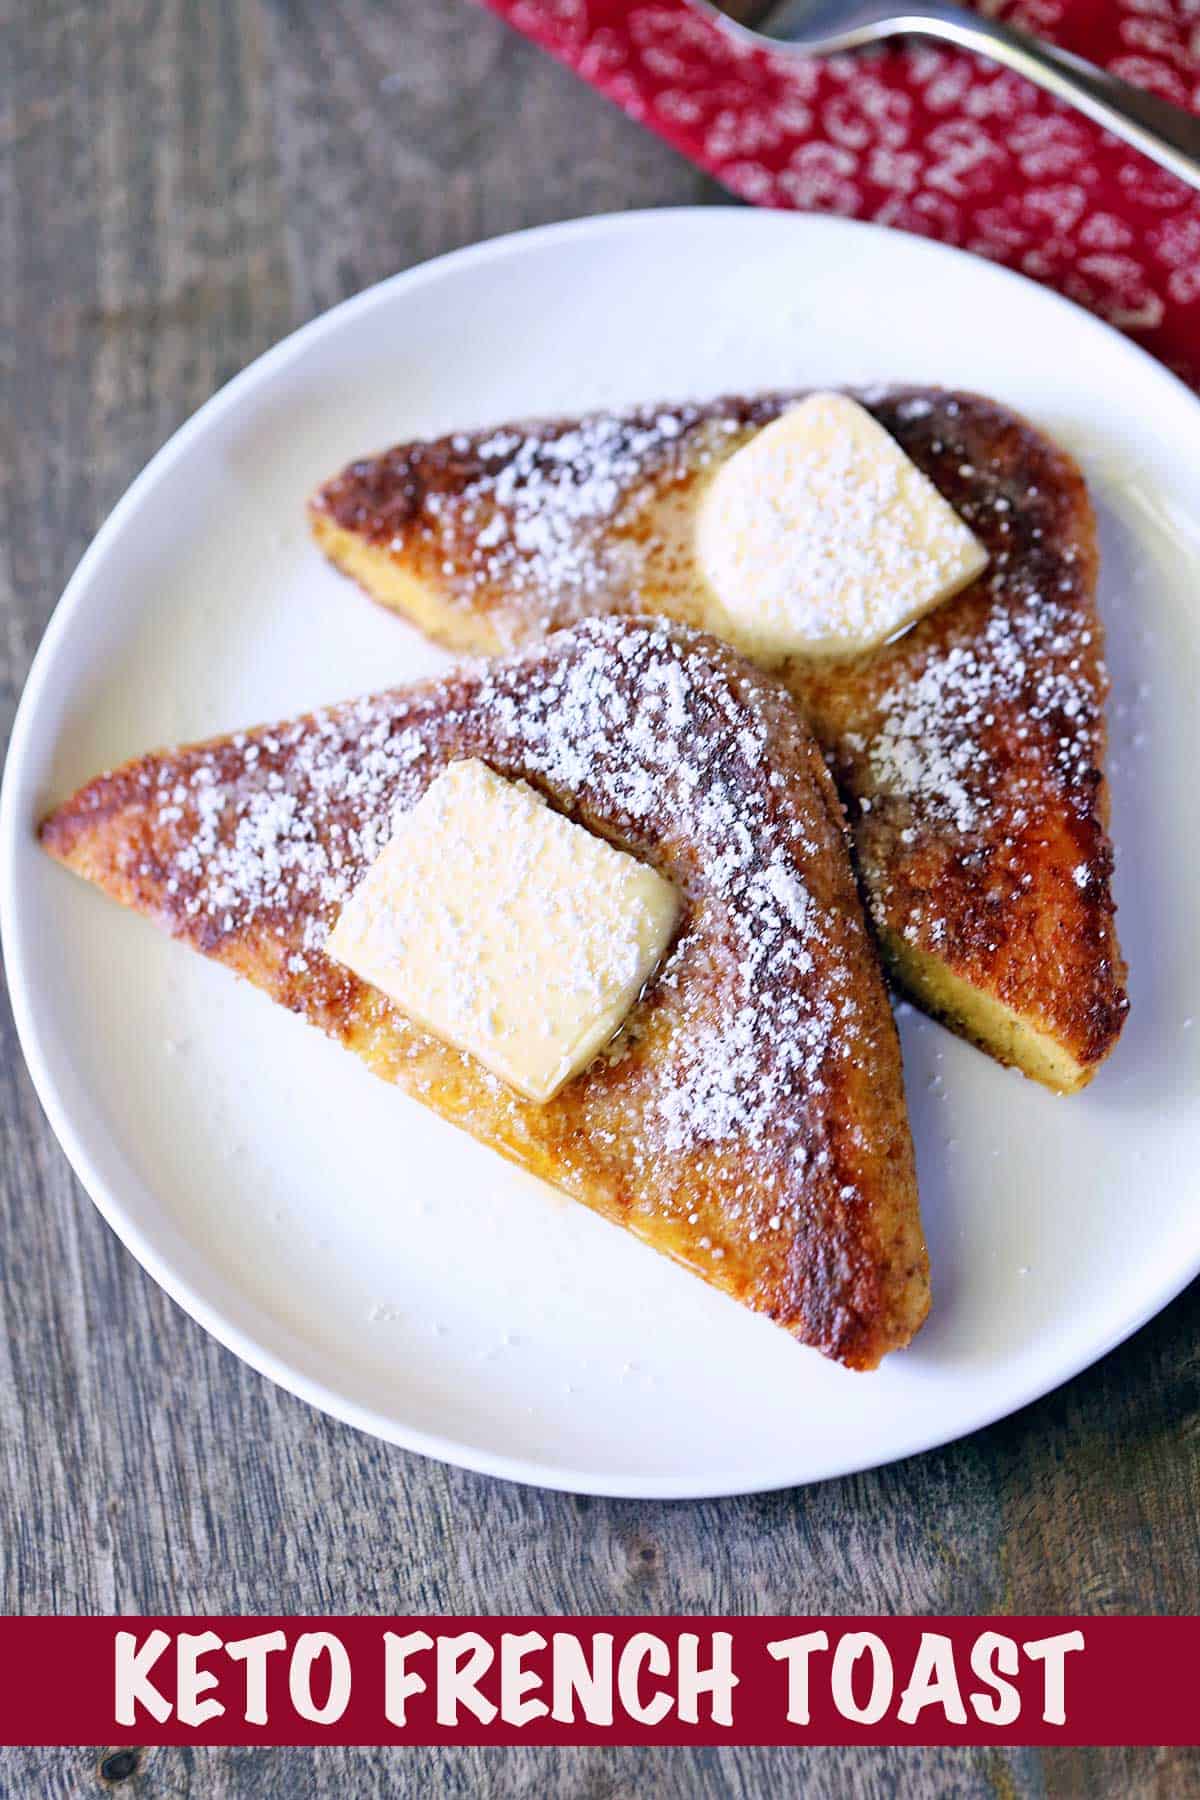 Keto French toast served on a white plate.